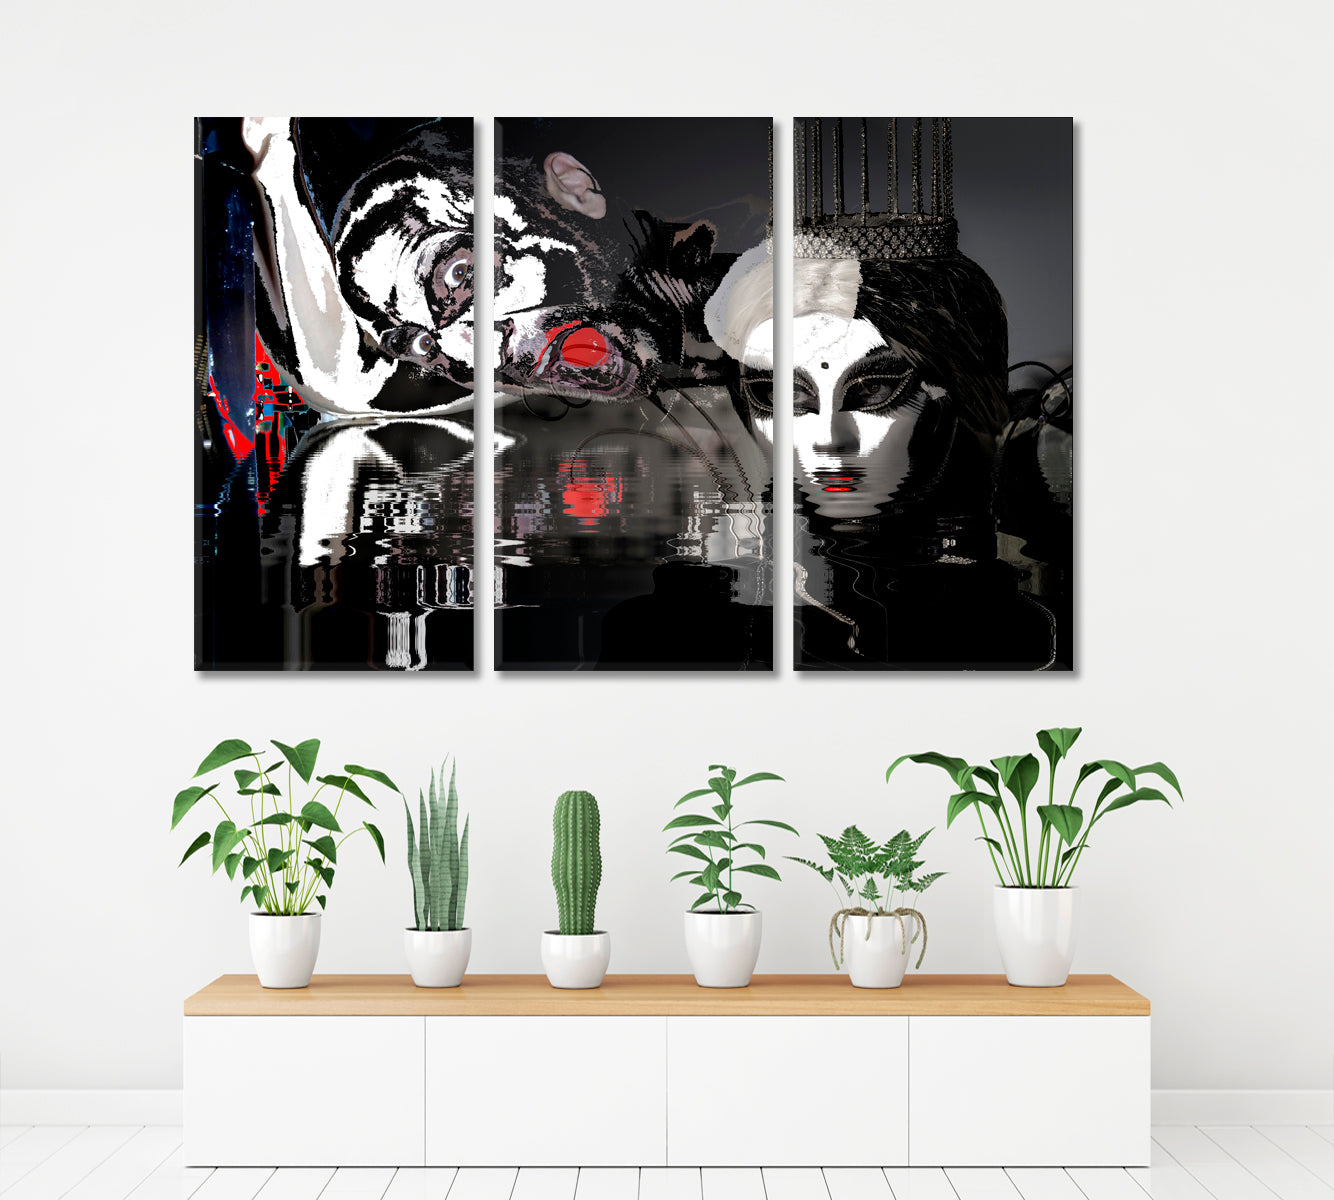 Mysterious Glamour Princess White Mask Crown Screaming Man Surreal Art Surreal Fantasy Large Art Print Décor Artesty 3 panels 36" x 24" 